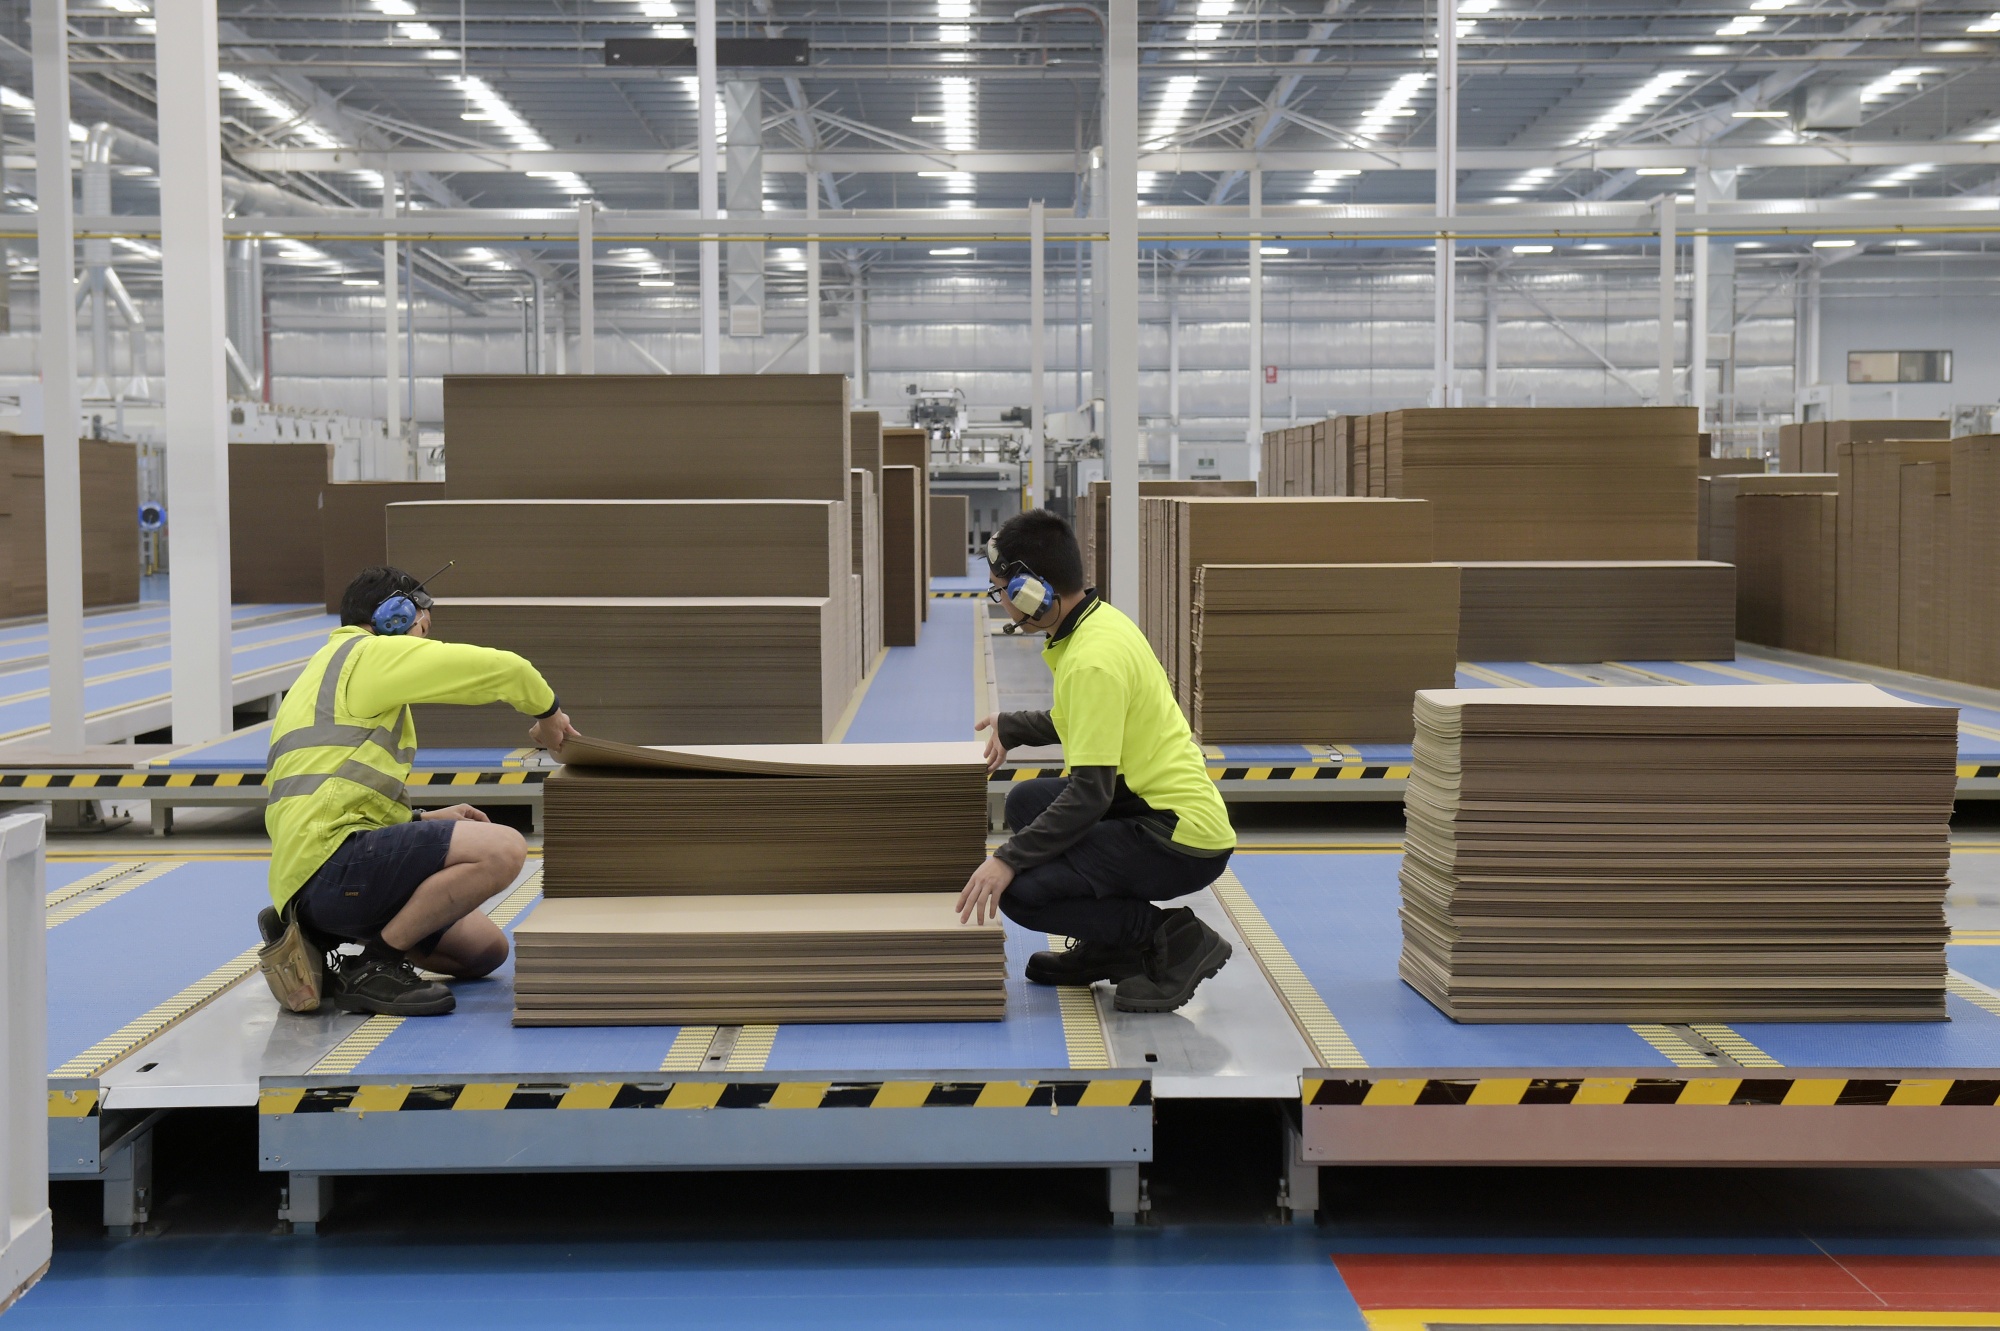 Employees check a stack of cardboard at the end of a conveyor&nbsp;in Melbourne, Australia.